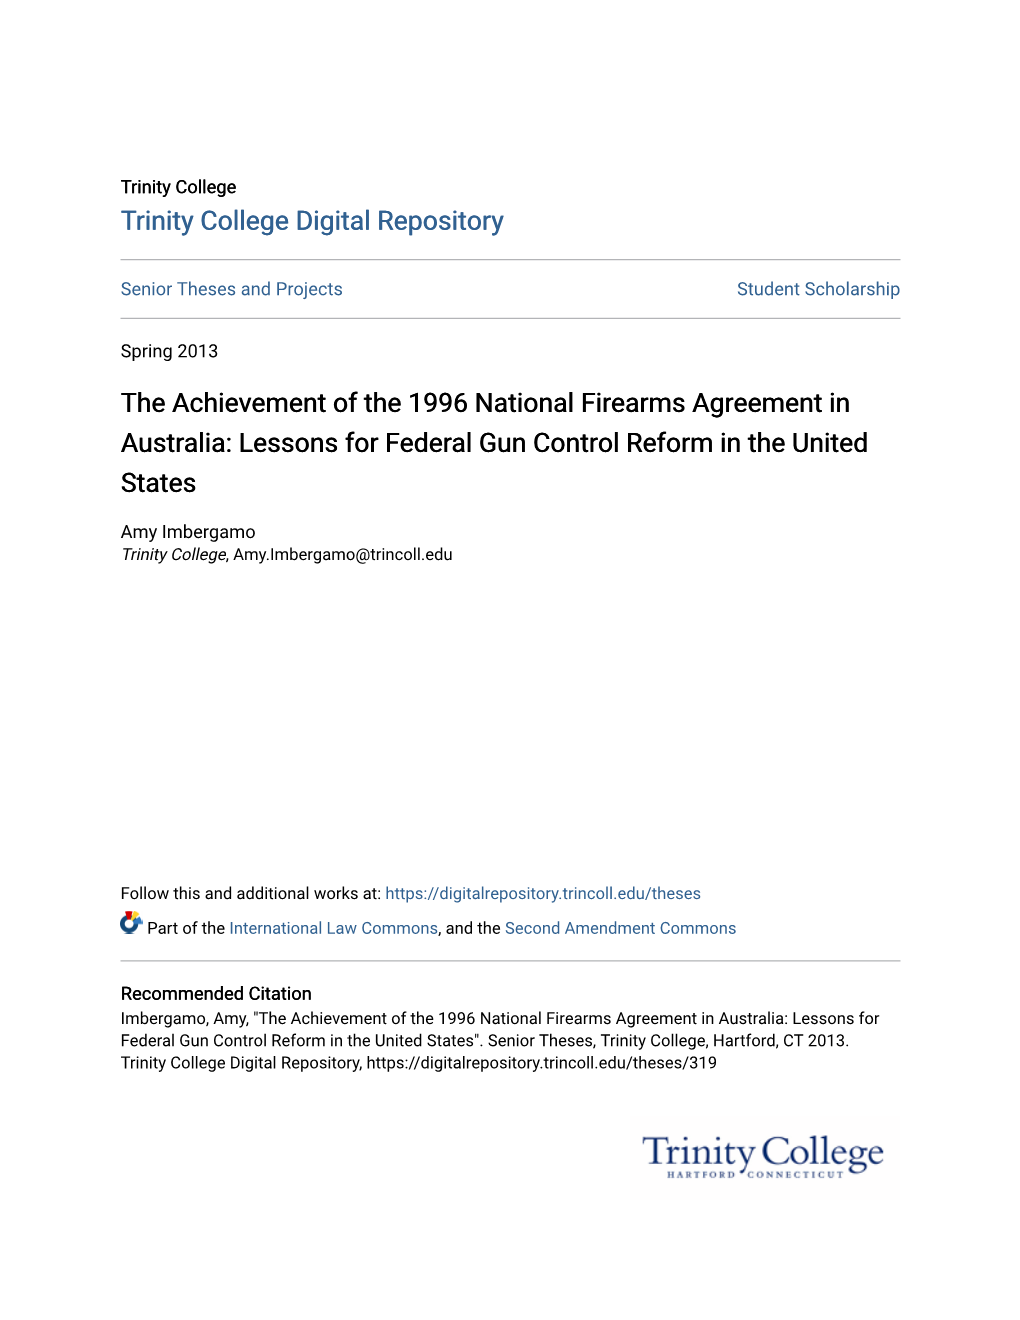 The Achievement of the 1996 National Firearms Agreement in Australia: Lessons for Federal Gun Control Reform in the United States